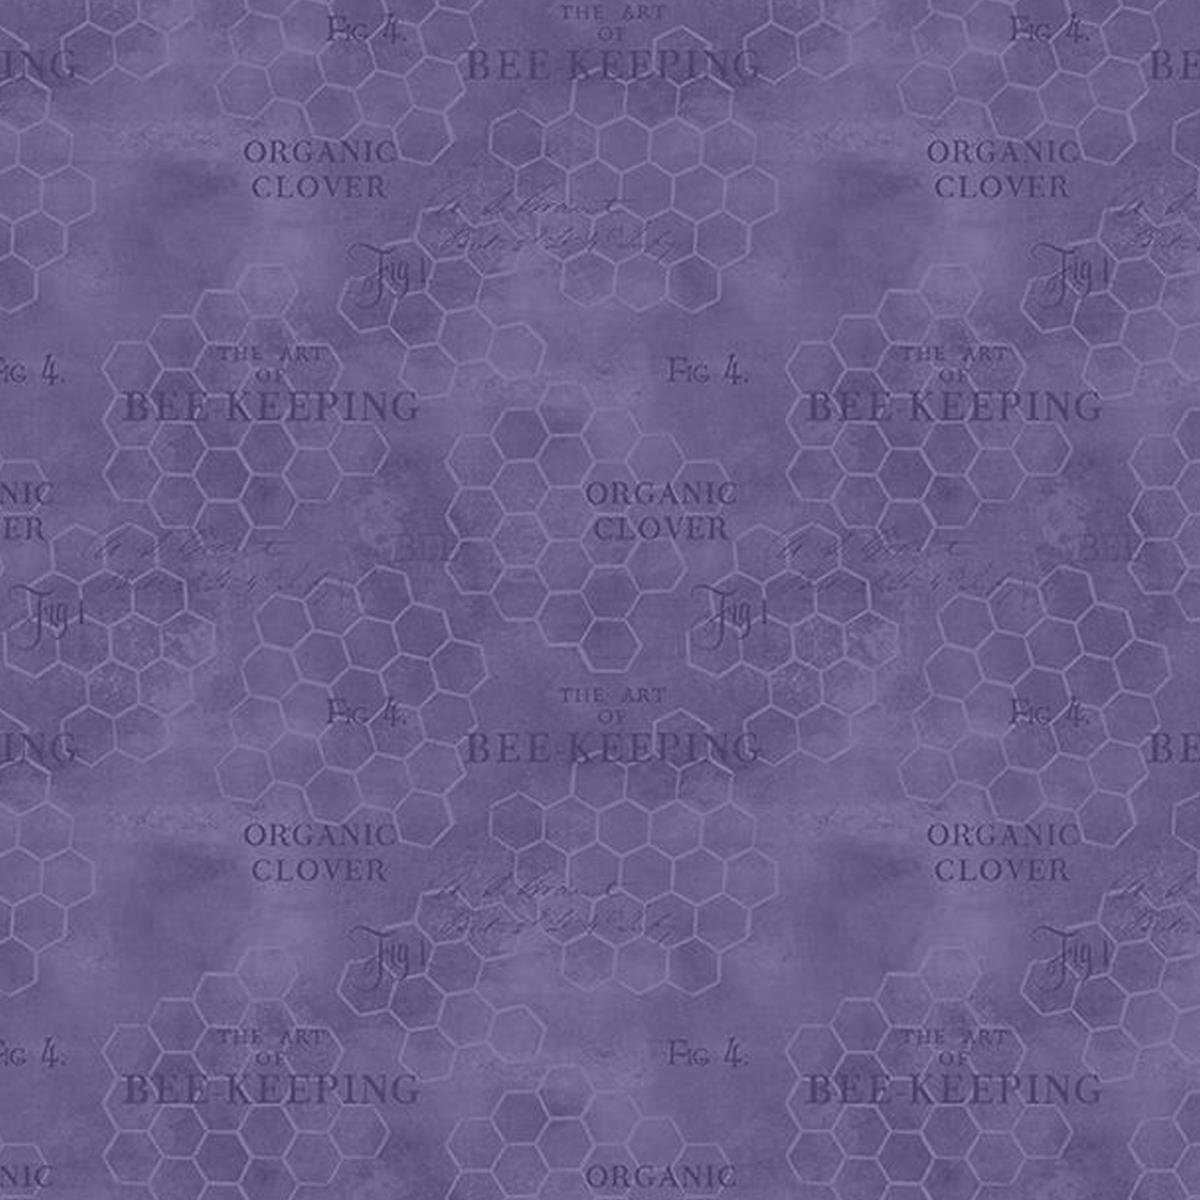 Purple Honeycomb Texture Cotton Fabric by the Yard or Select Length 27611-660 The Art of Beekeeping Wilmington Prints